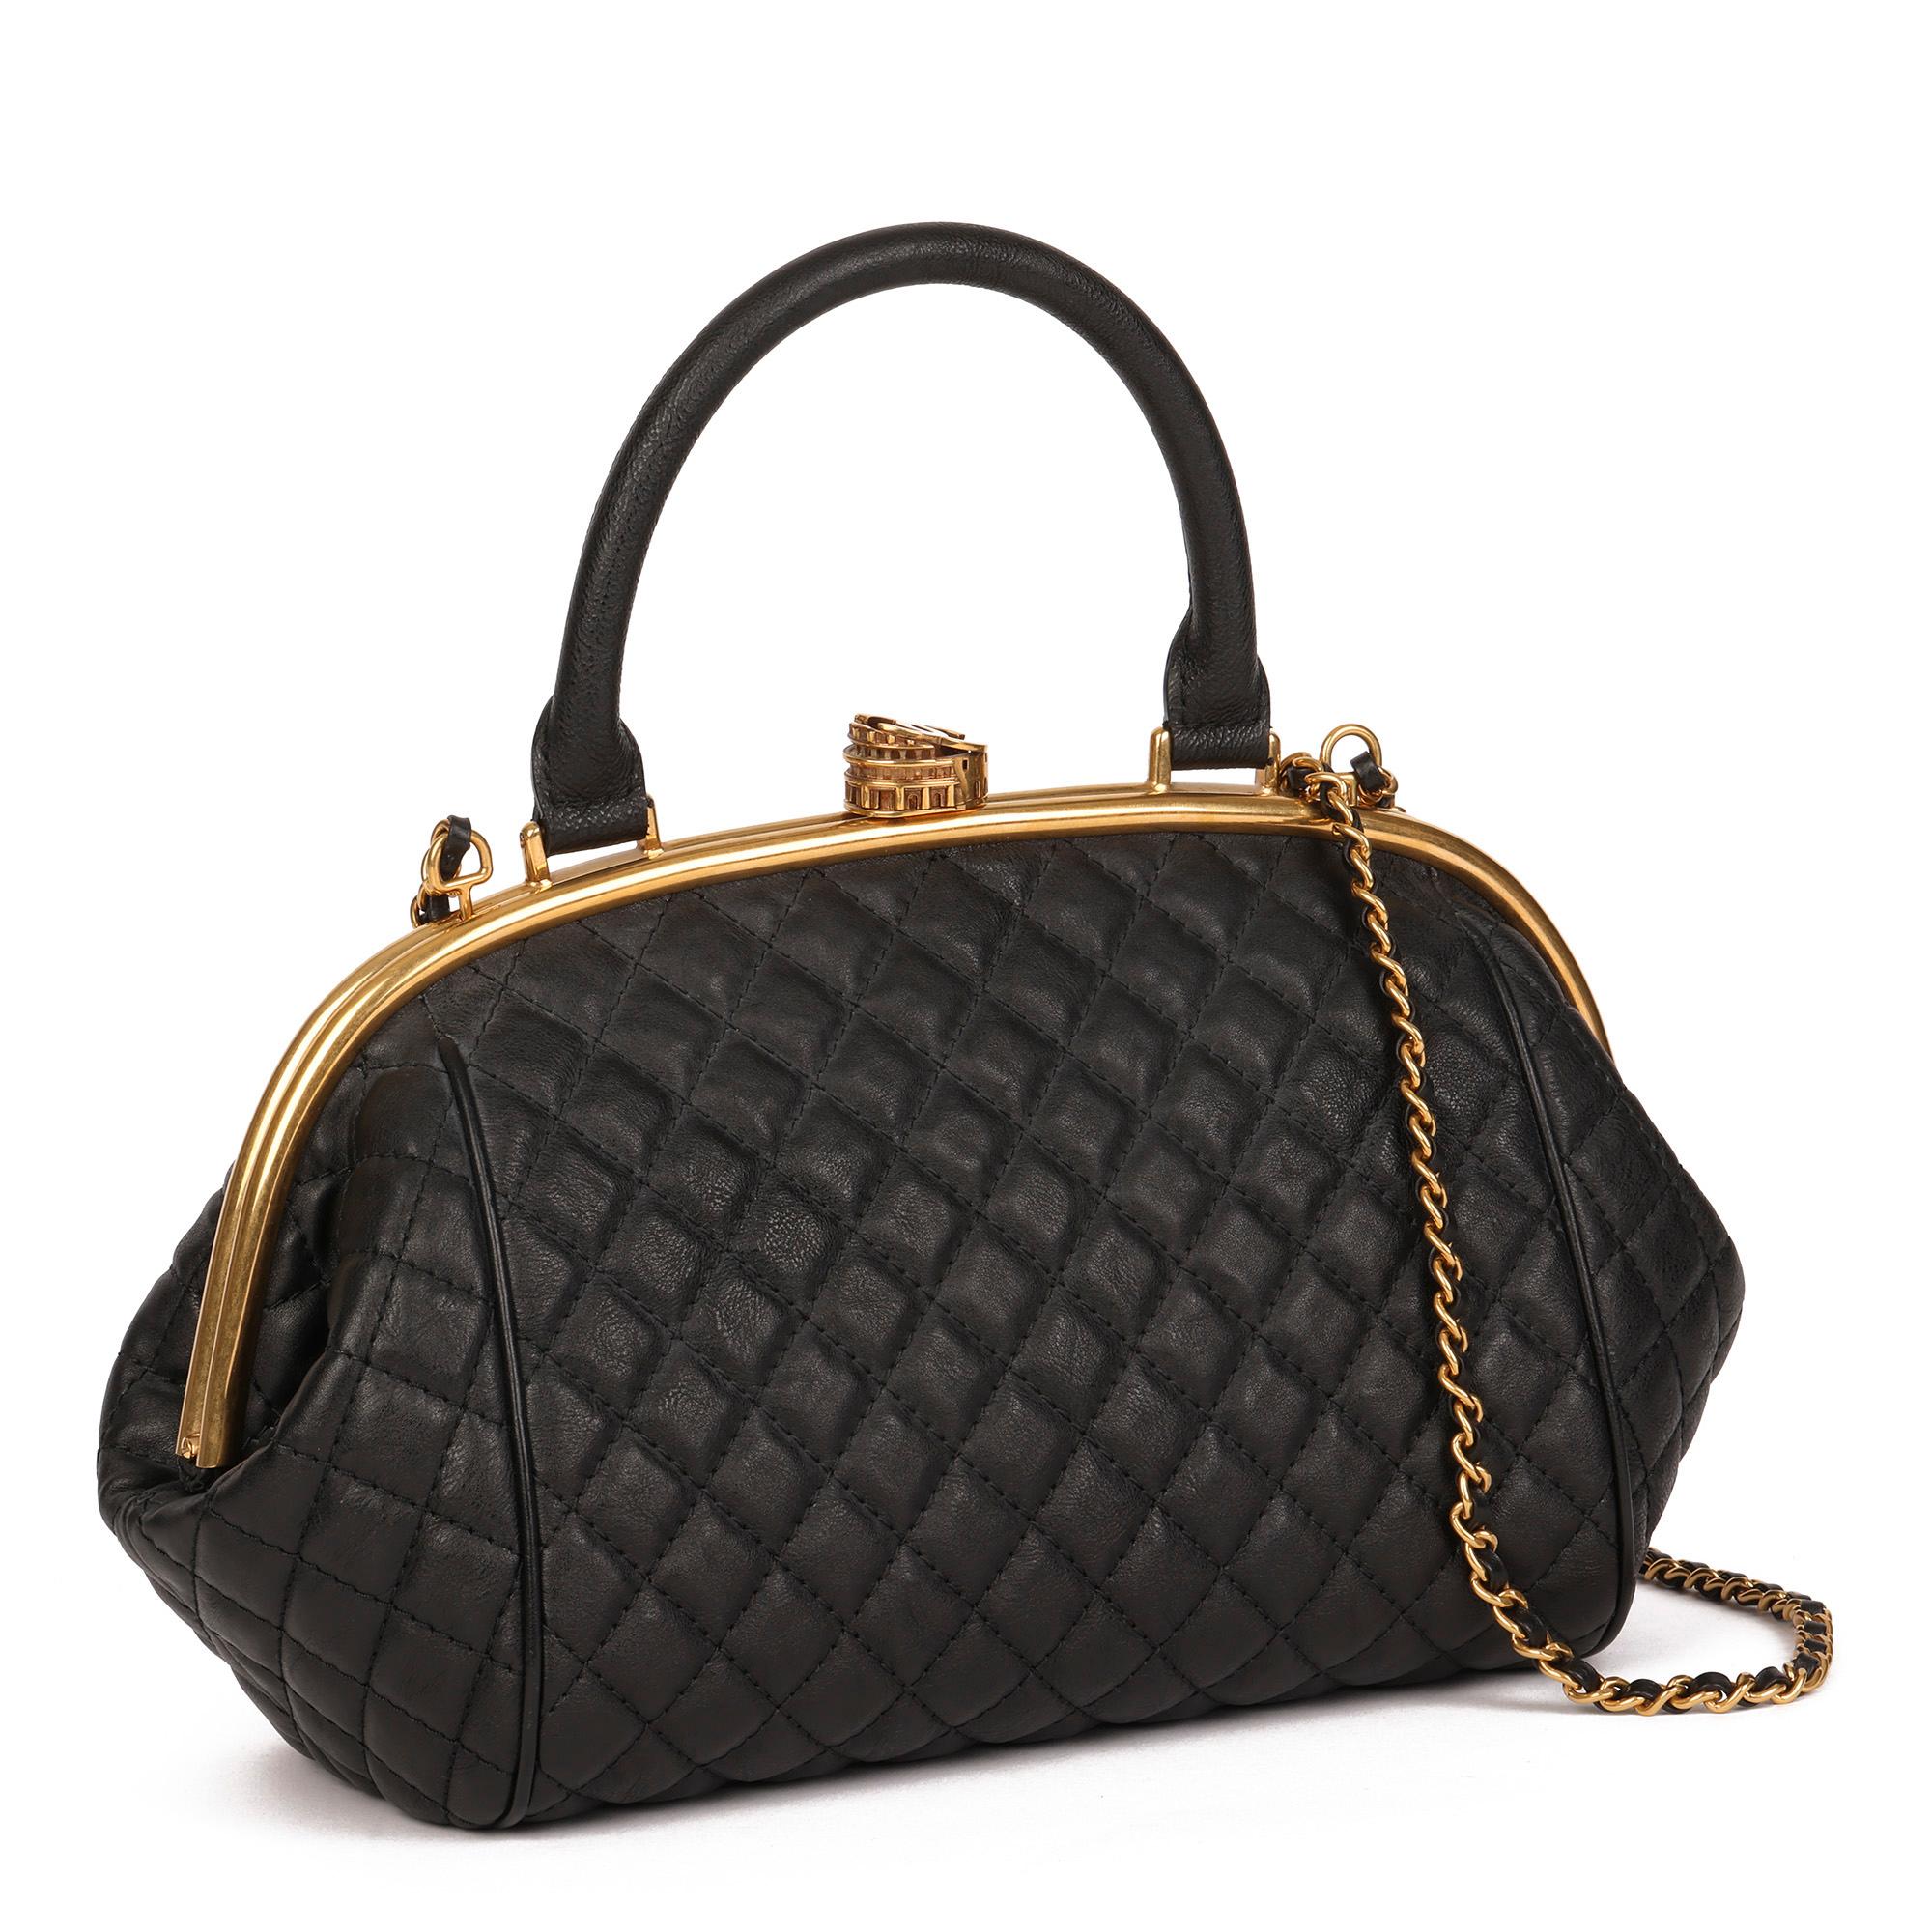 CHANEL
Black Quilted Calfskin Leather Paris in Rome Colosseum Kiss Lock Bowling Bag

Xupes Reference: CB474
Serial Number: 23115378
Age (Circa): 2016
Accompanied By: Chanel Dust Bag, Authenticity Card, Care Booklet
Authenticity Details: Authenticity